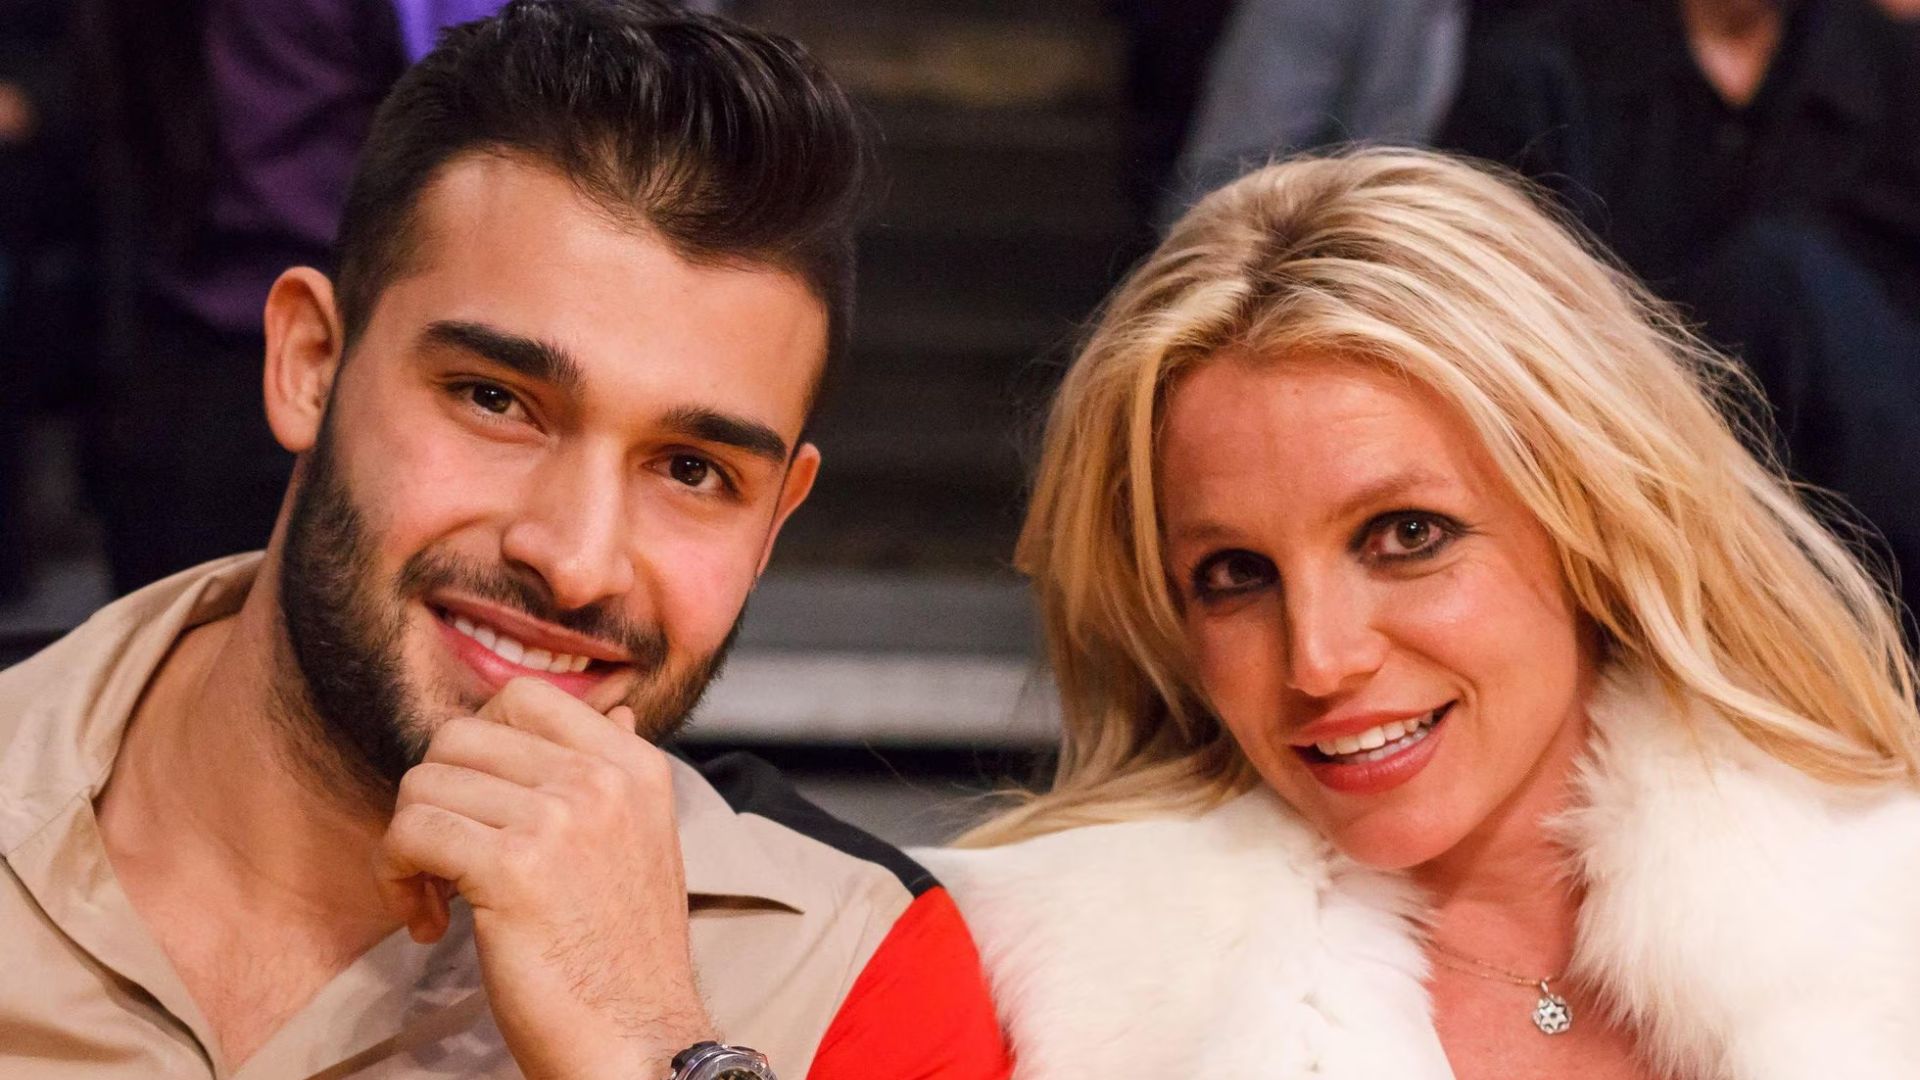 Britney Spears and Sam Asghari Separate After Months of Struggles in Their Marriage: Exclusive Sources